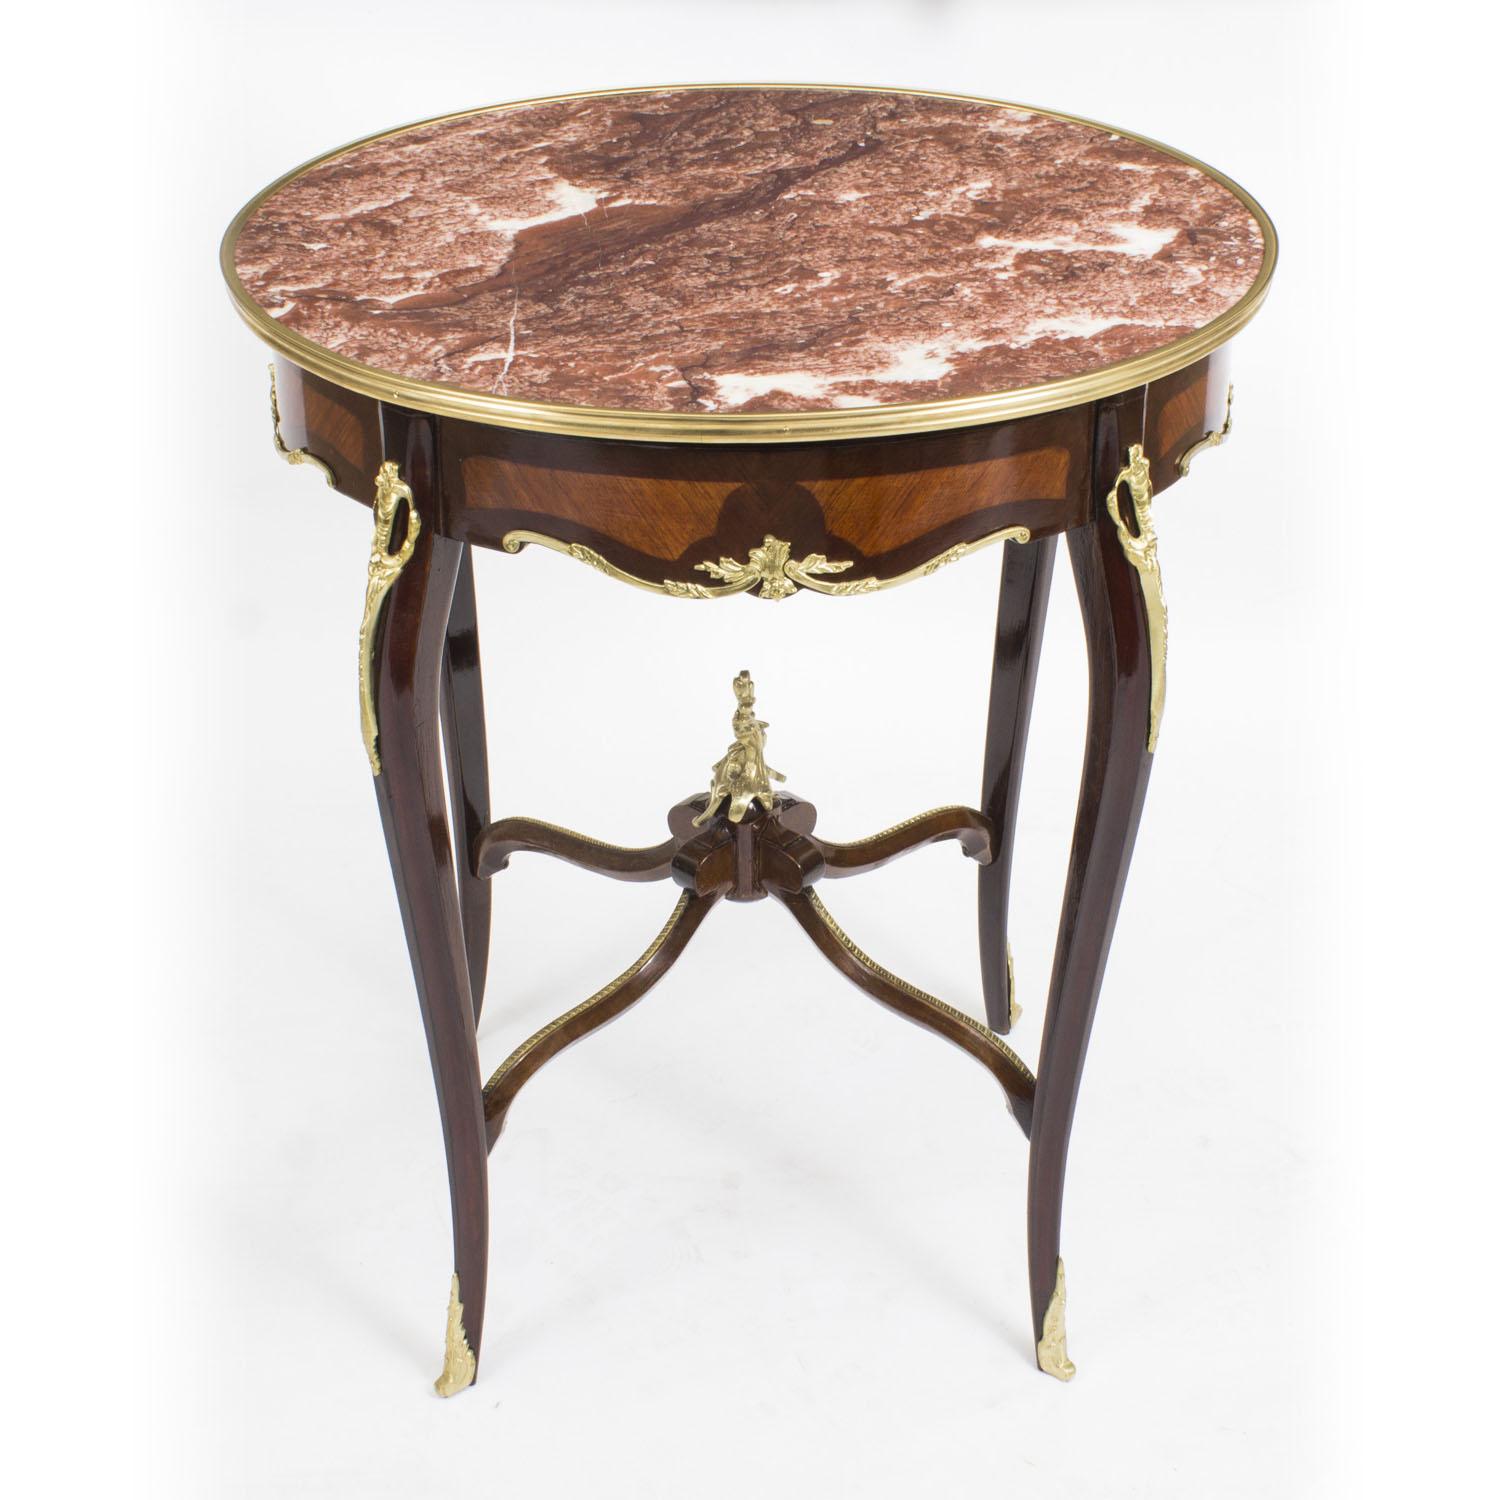 This is a handsome Vintage French Louis Revival occasional table with fabulous ormolu decoration and a 